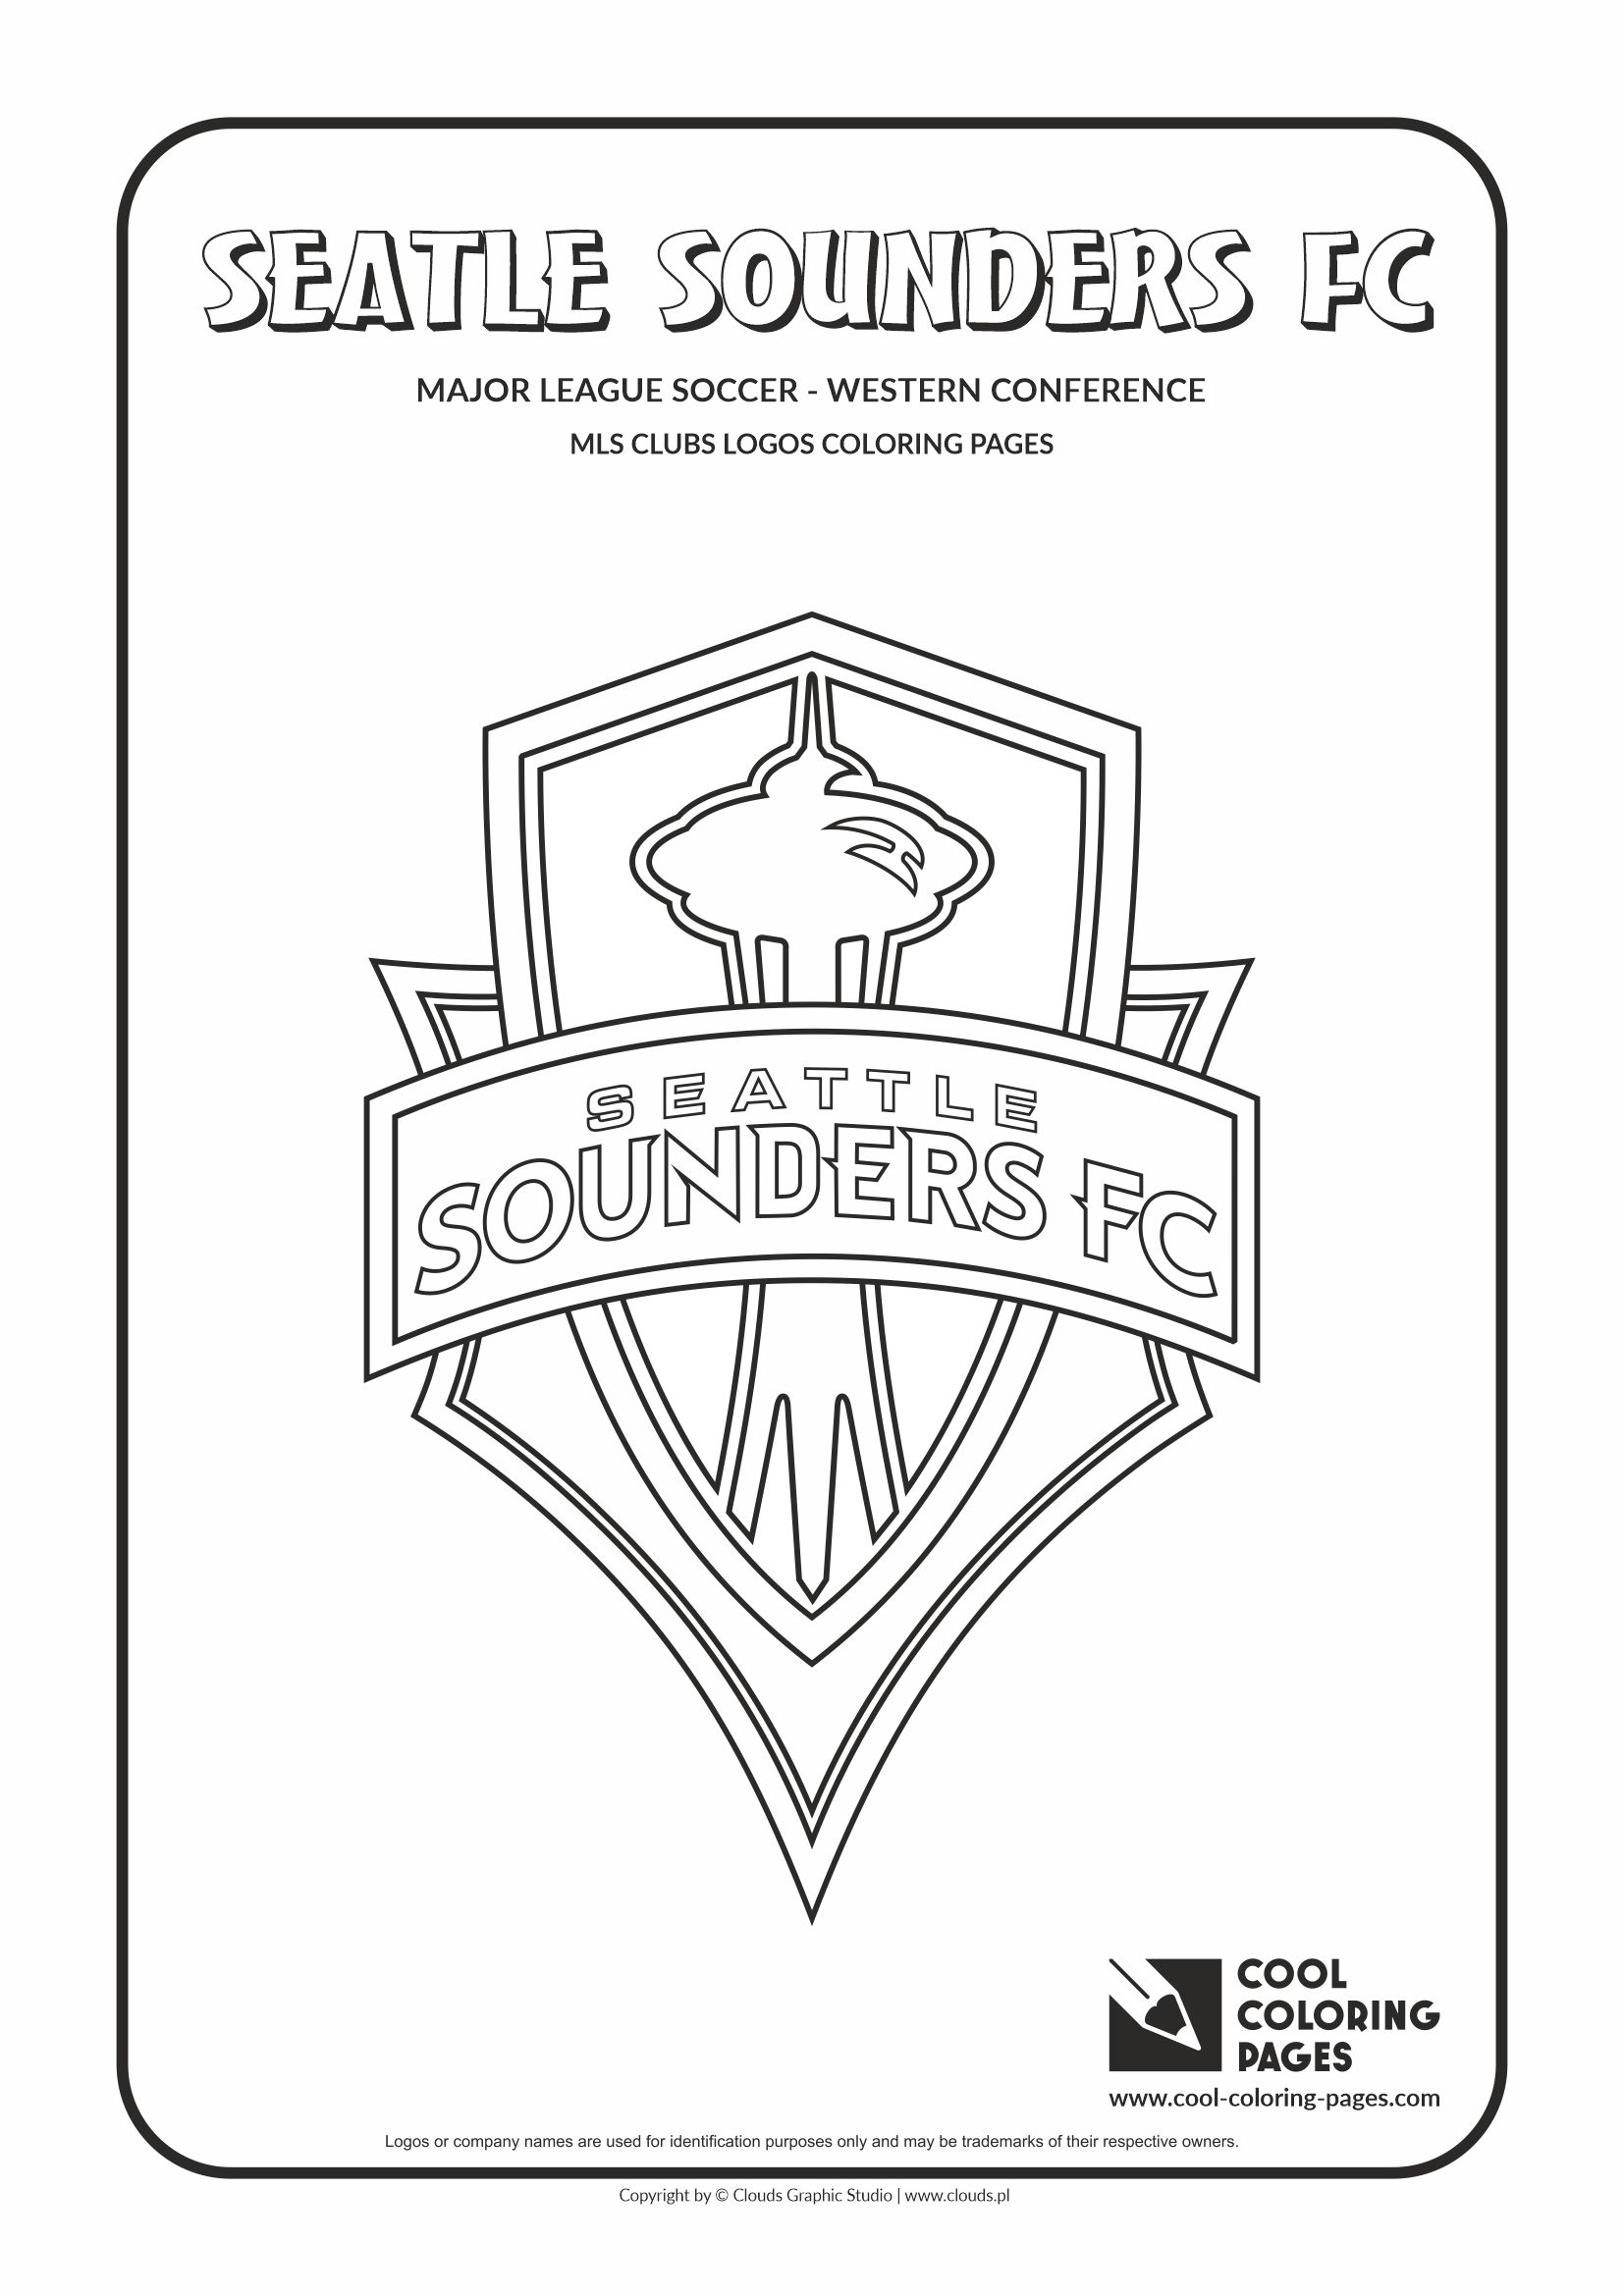 Cool Coloring Pages - MLS clubs logos - Seatle Sounders FC